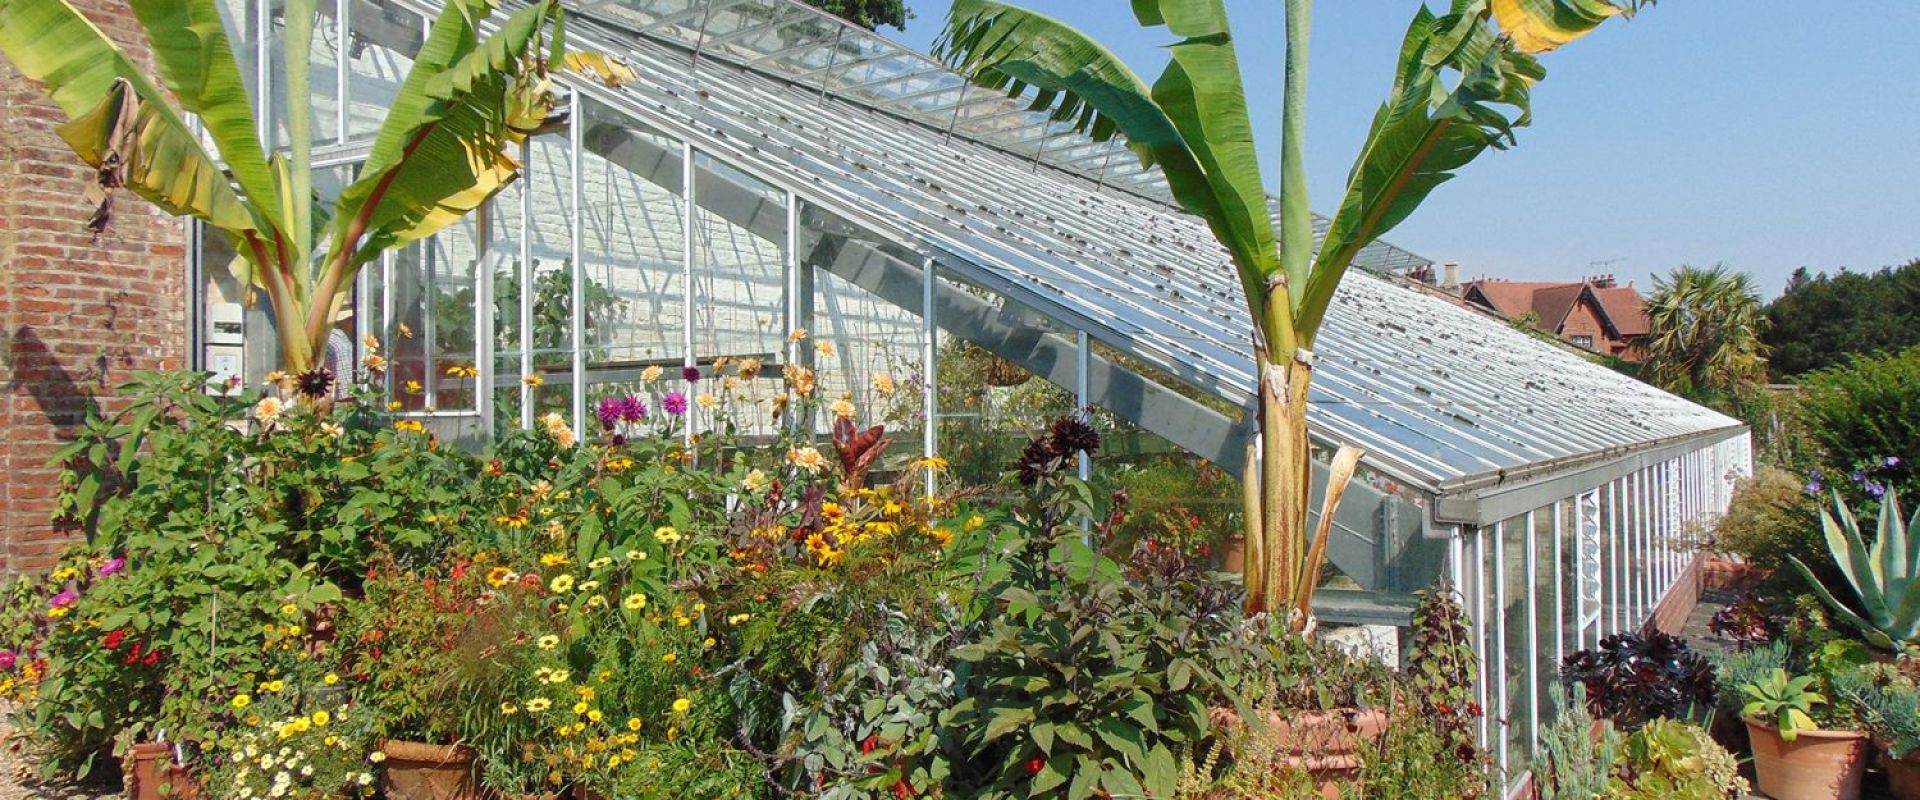 A white-framed glass greenhouse stands behind palm trees and colourful flowers.